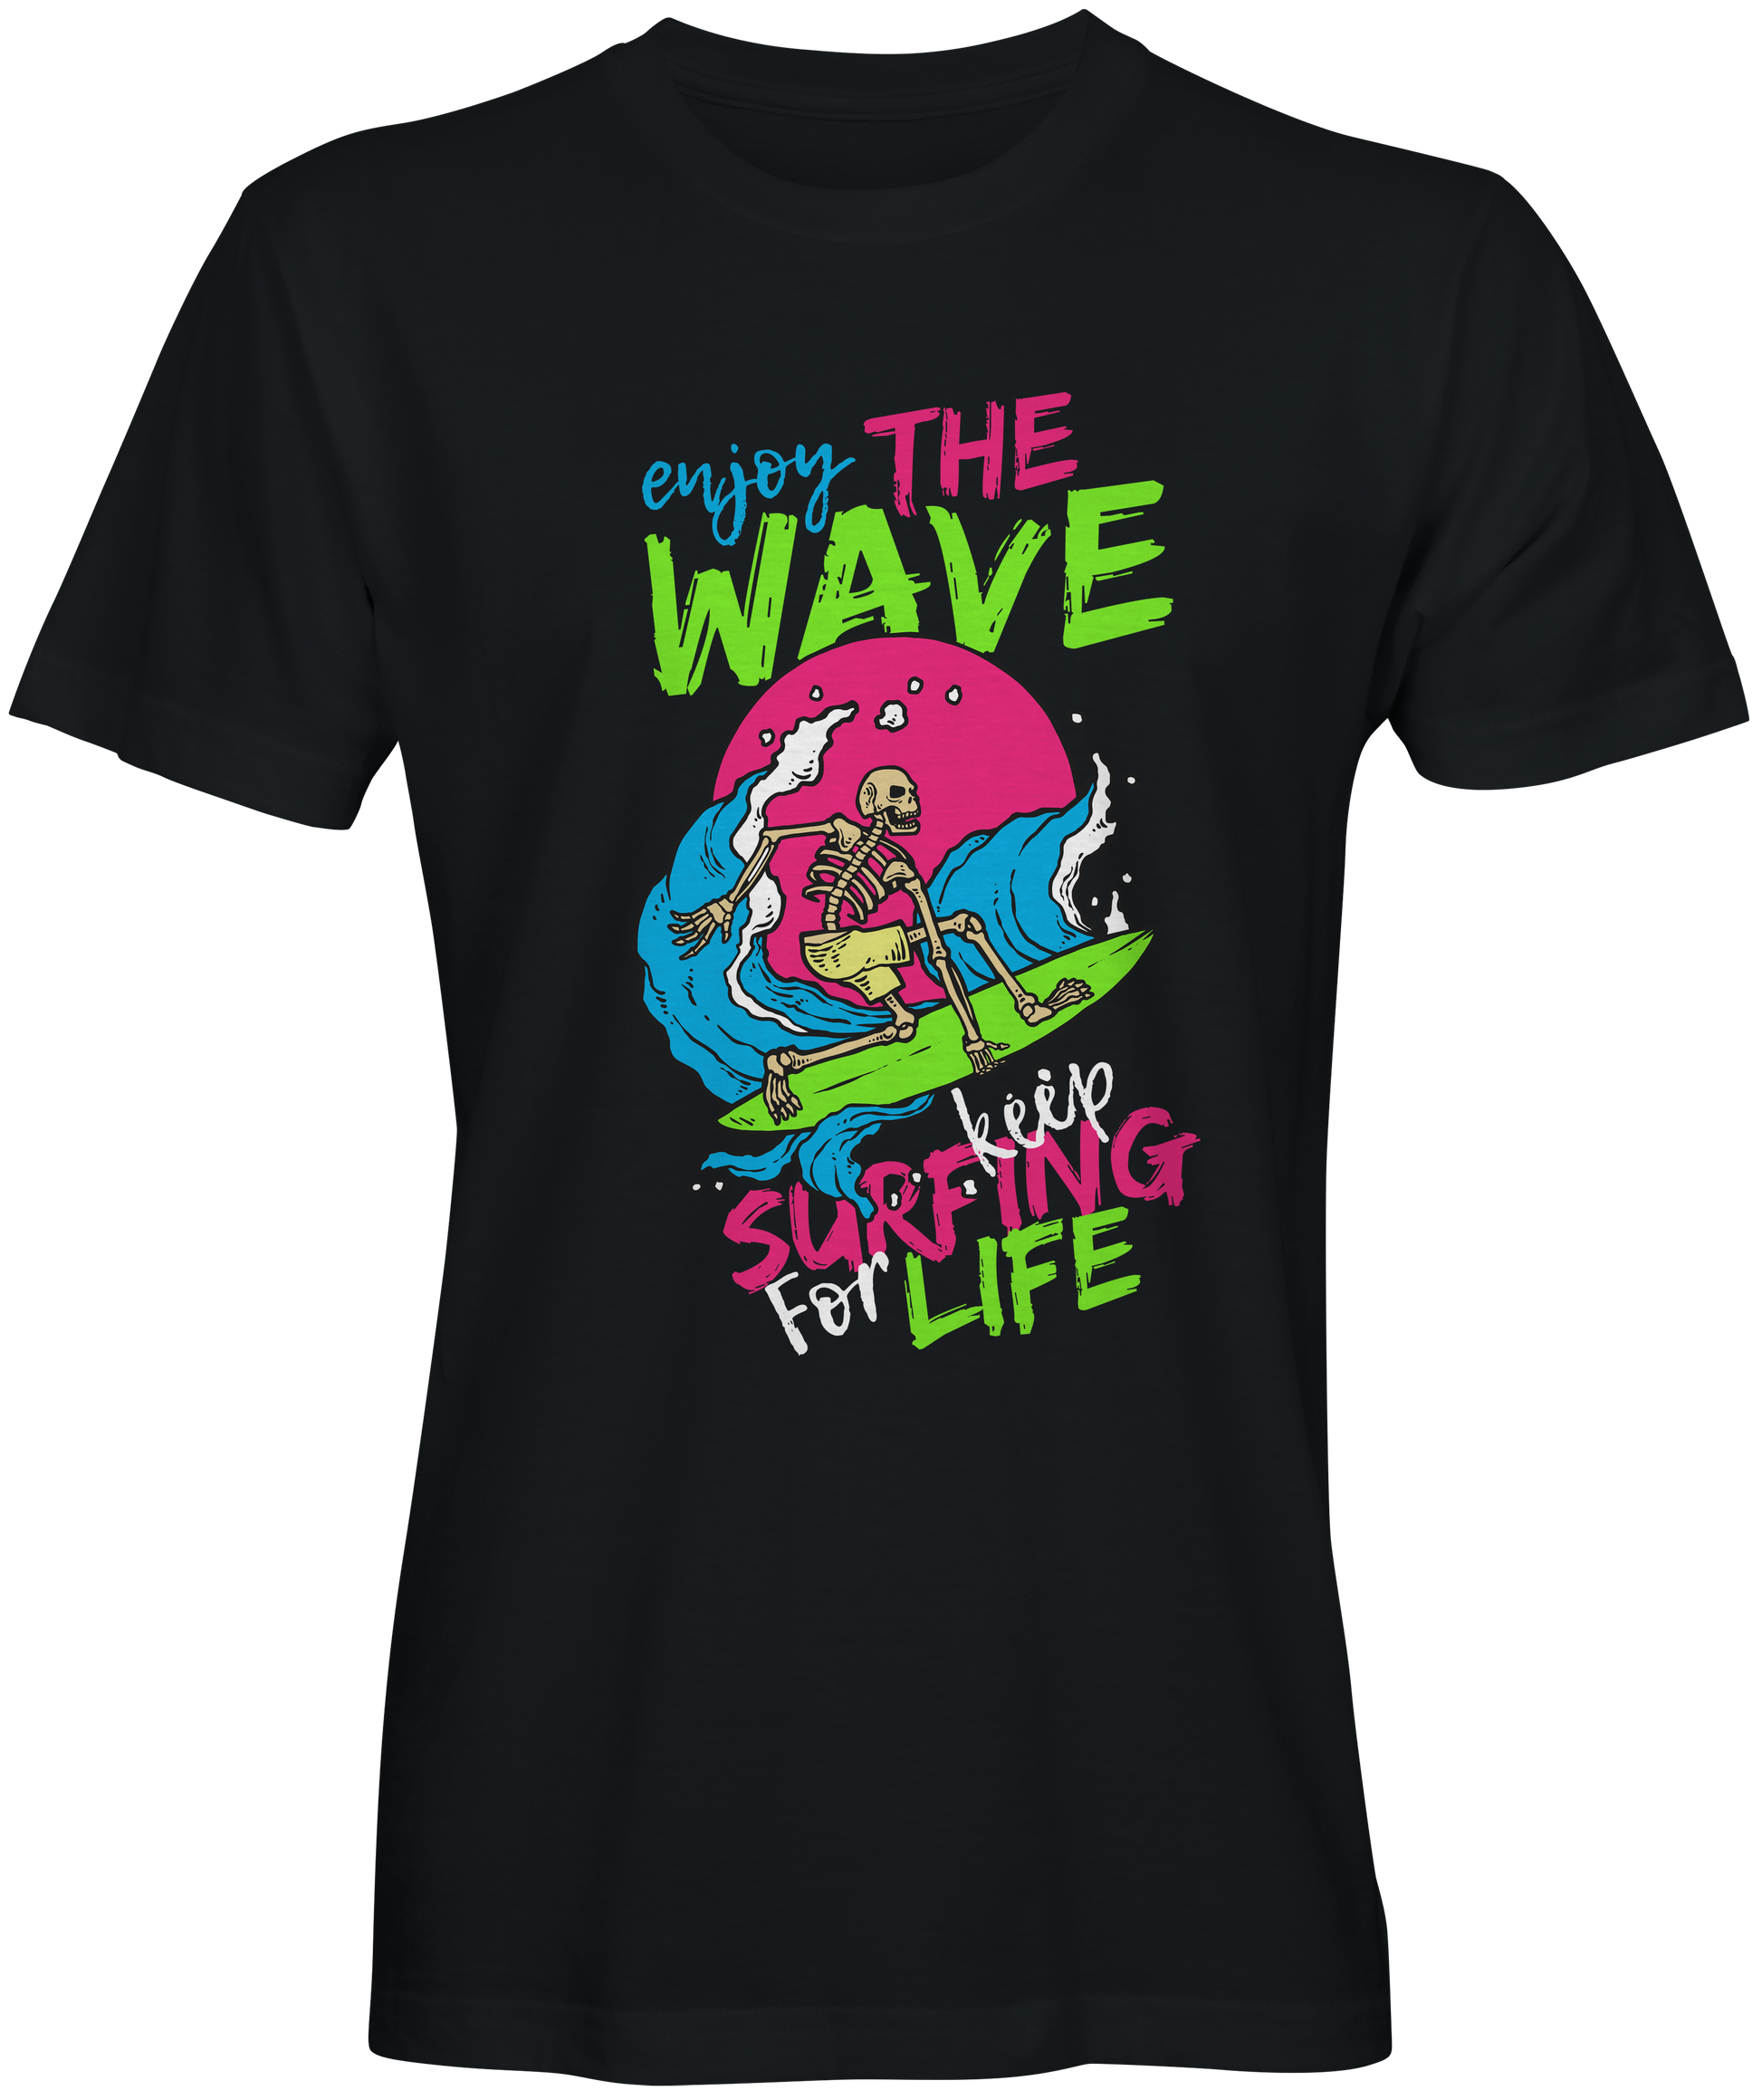 Ride the Wave Inspired T-shirts